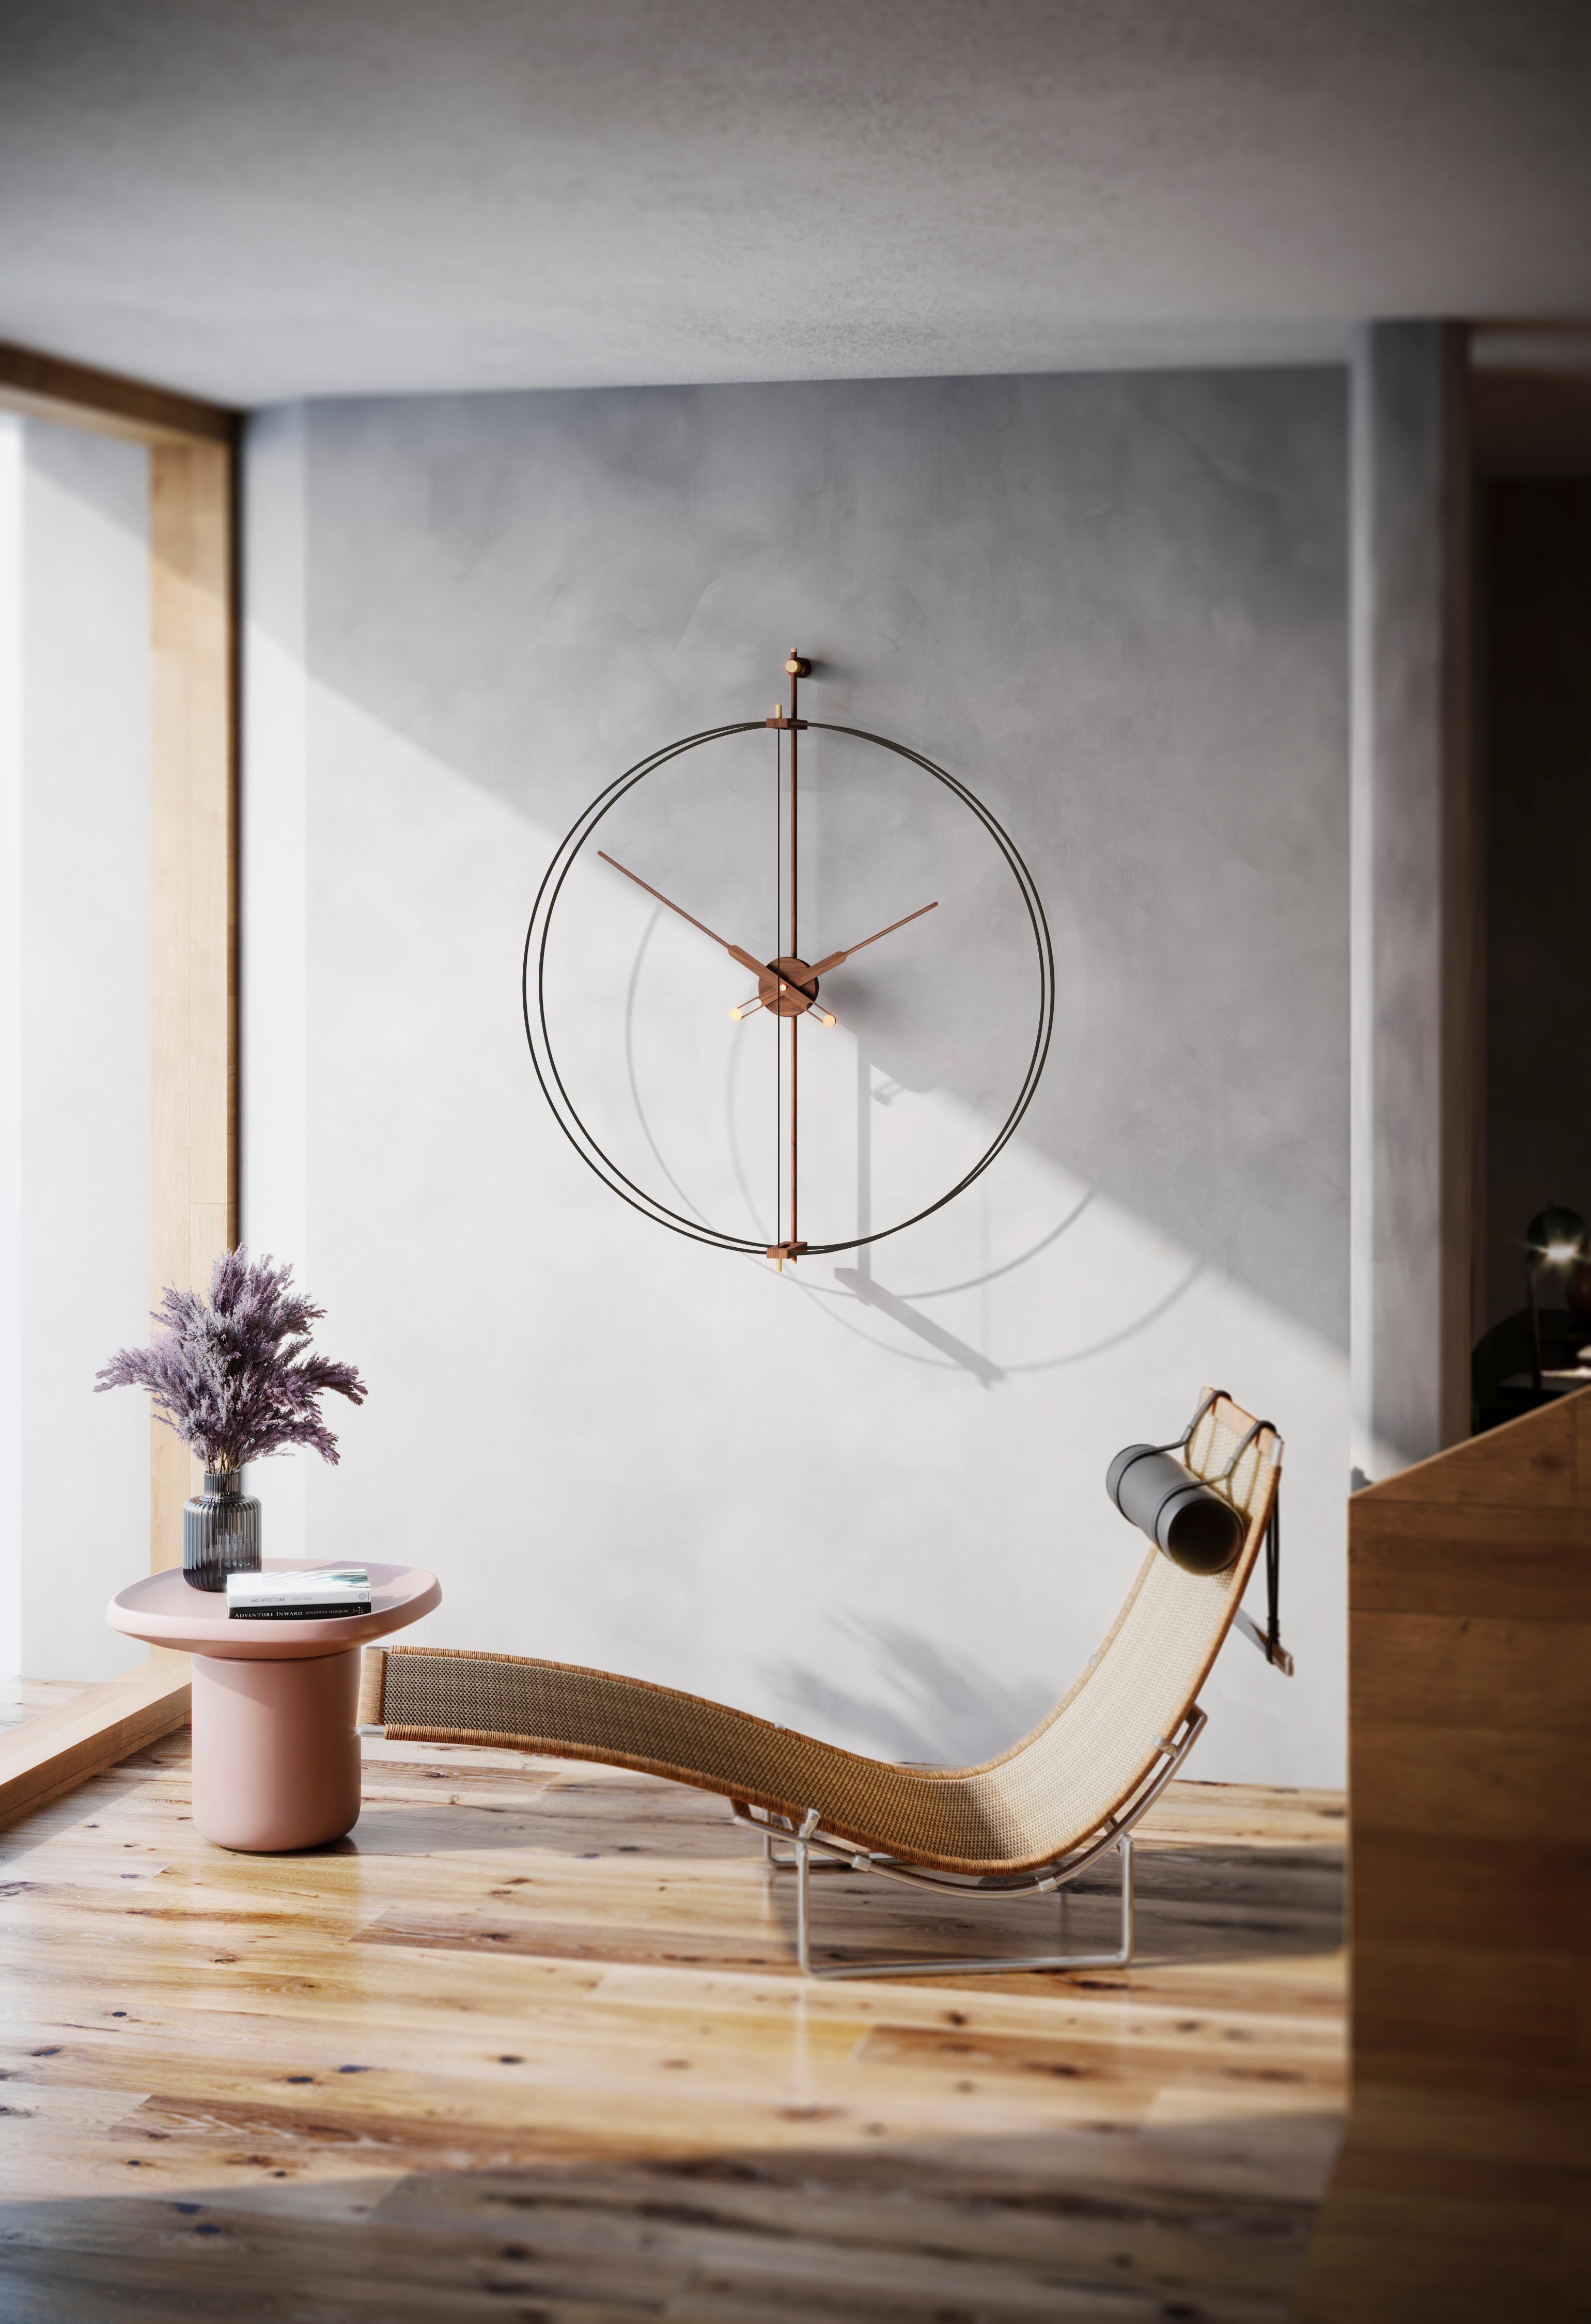 Renovation of one of the most representative models of nomon, the iconic Barcelona clock. Incorporating a more glamorous style in the design.
It stands out for the brass finish in its fiberglass double ring.

Rings in brass finish, hands and